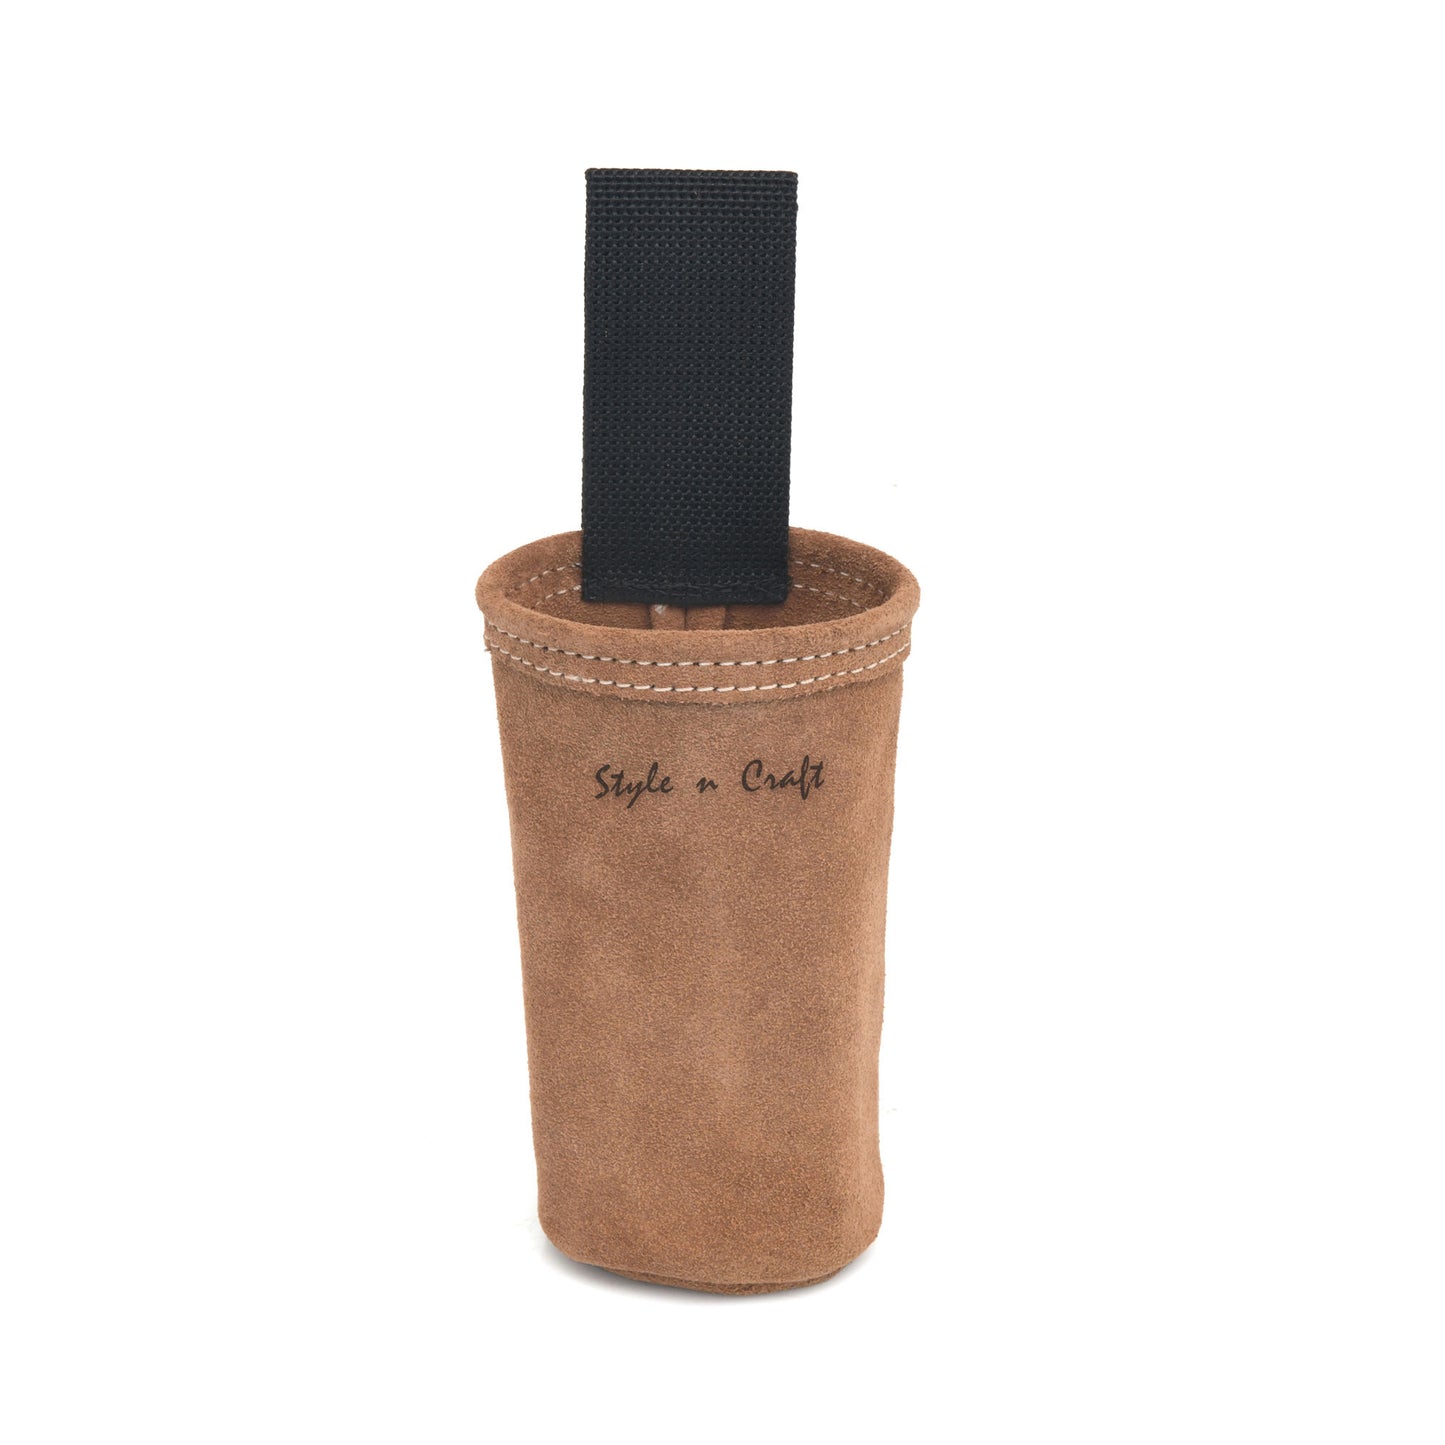 Style n Craft 88022 - Spray Paint Can Holder in Heavy Duty Suede Leather in Dark Tan Color - front view